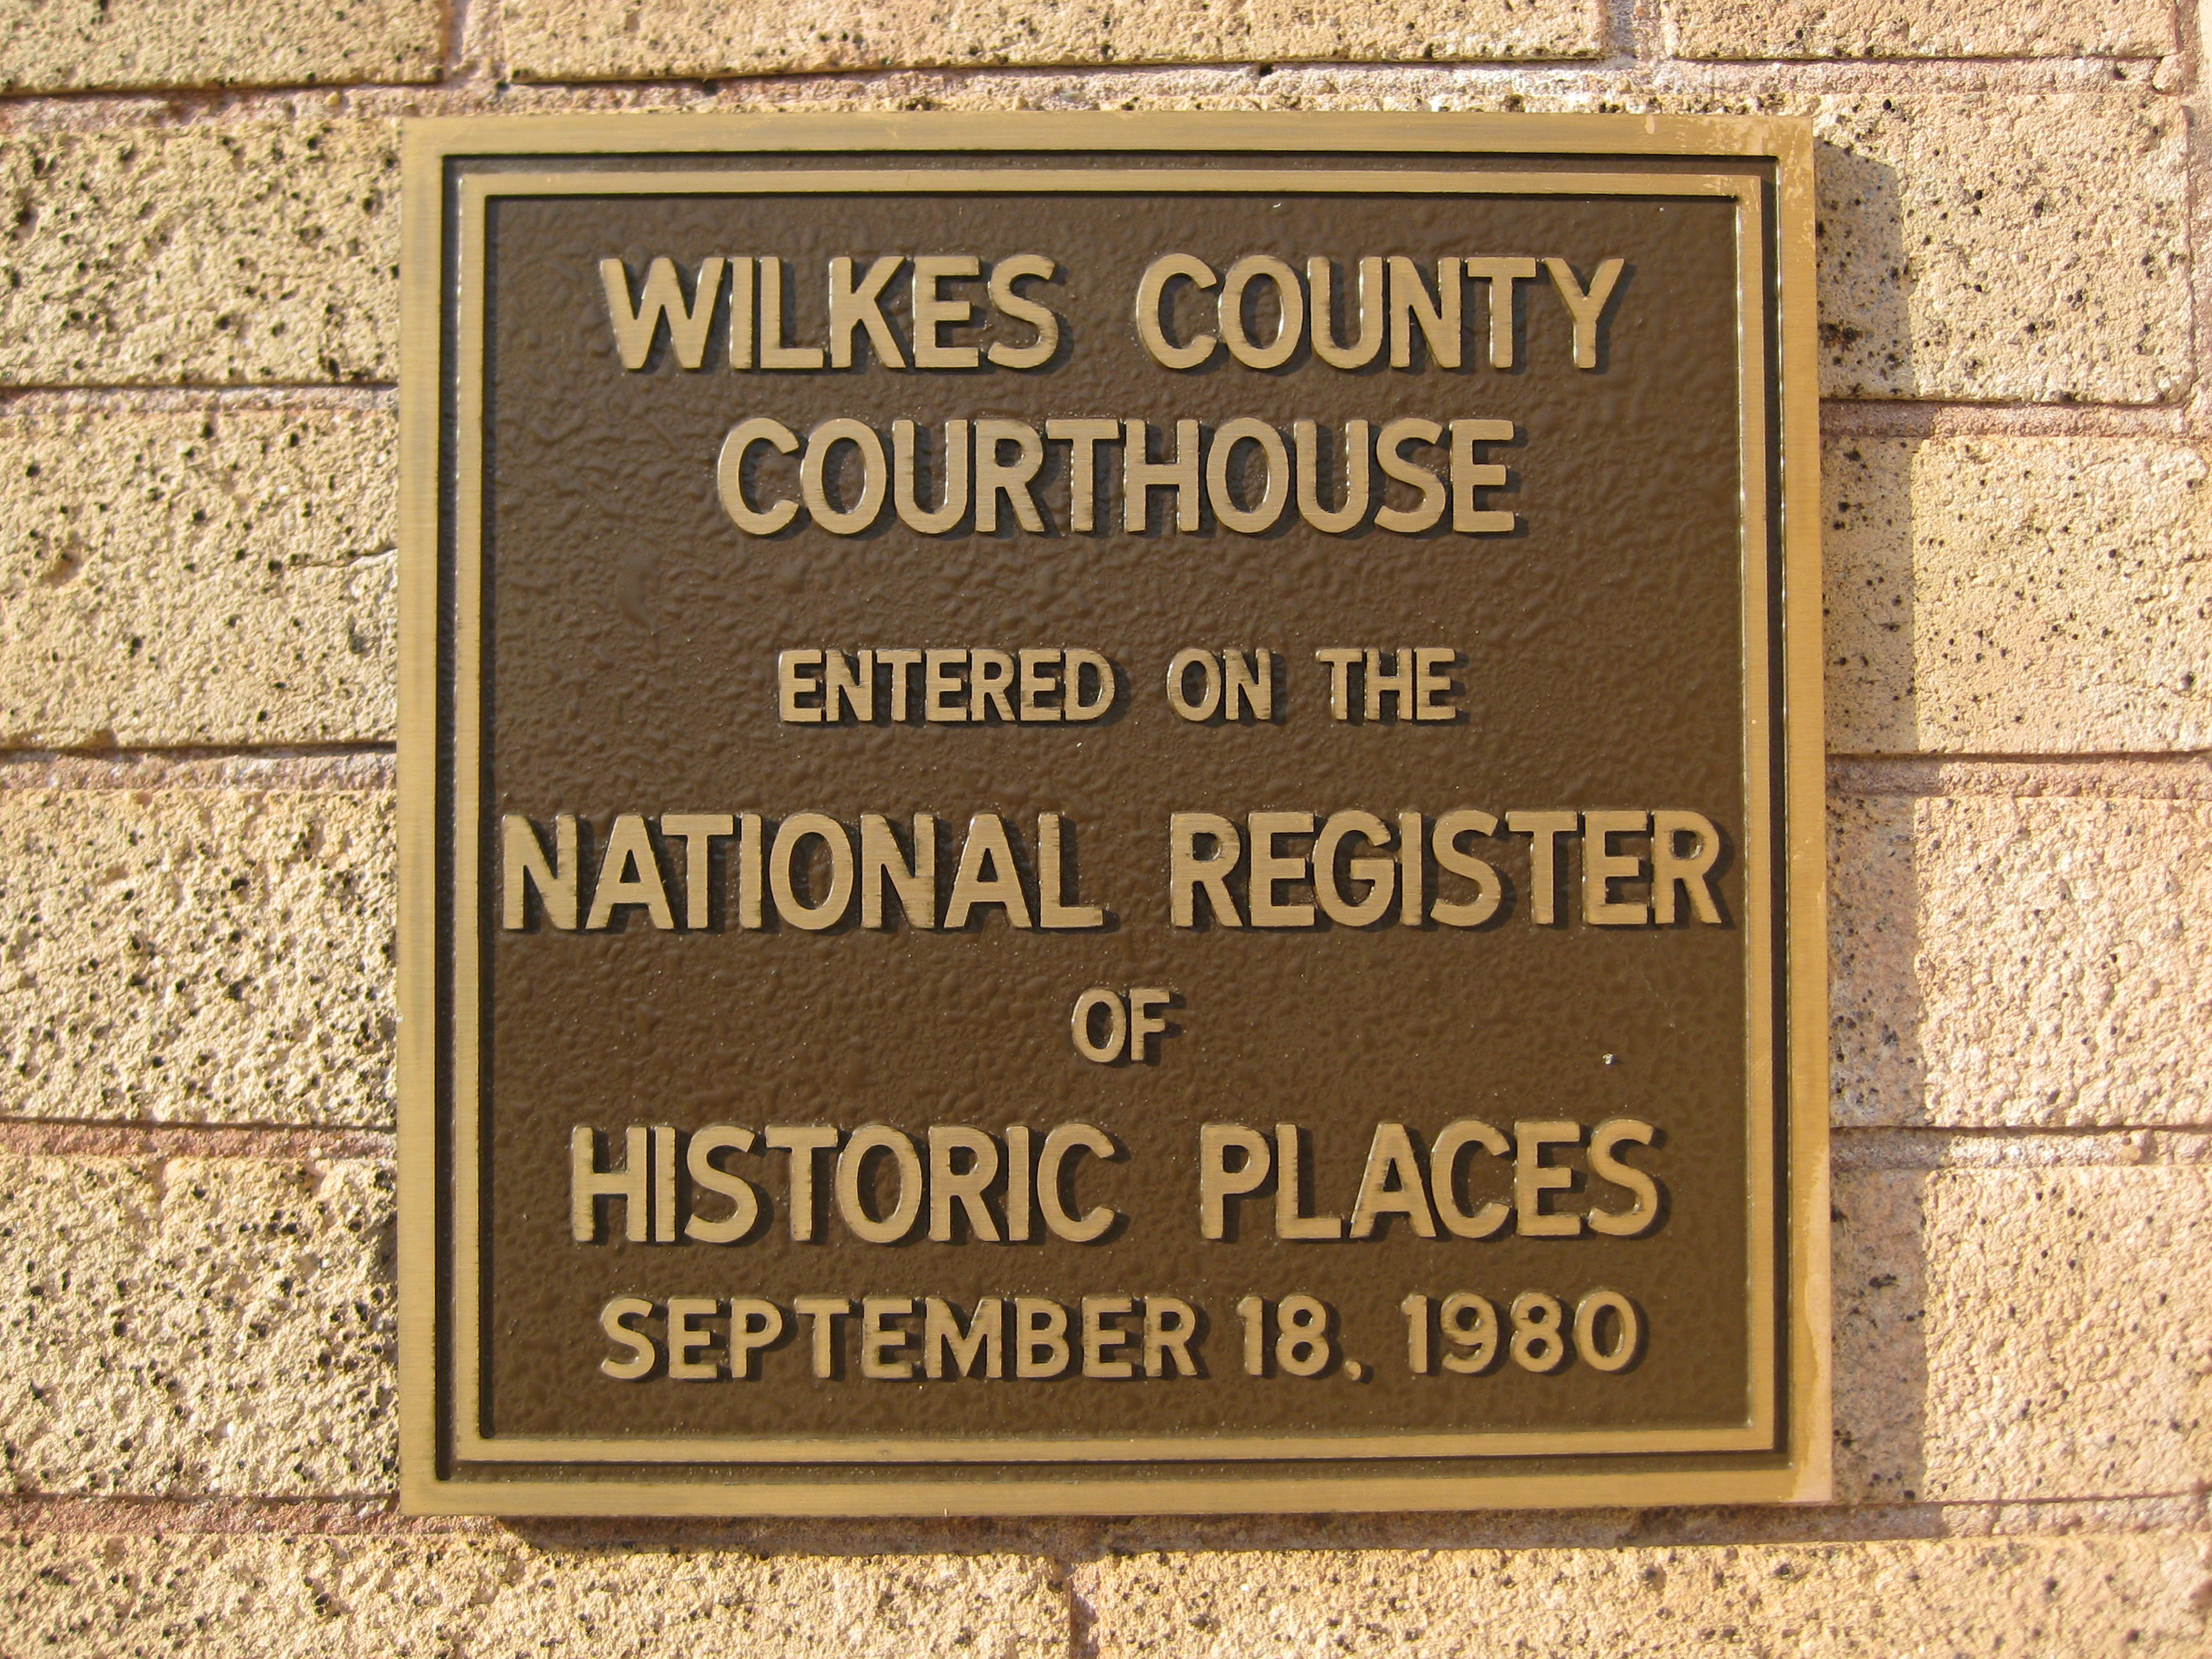 NRHP Plaque, Wilkes County Courthouse.jpg. 